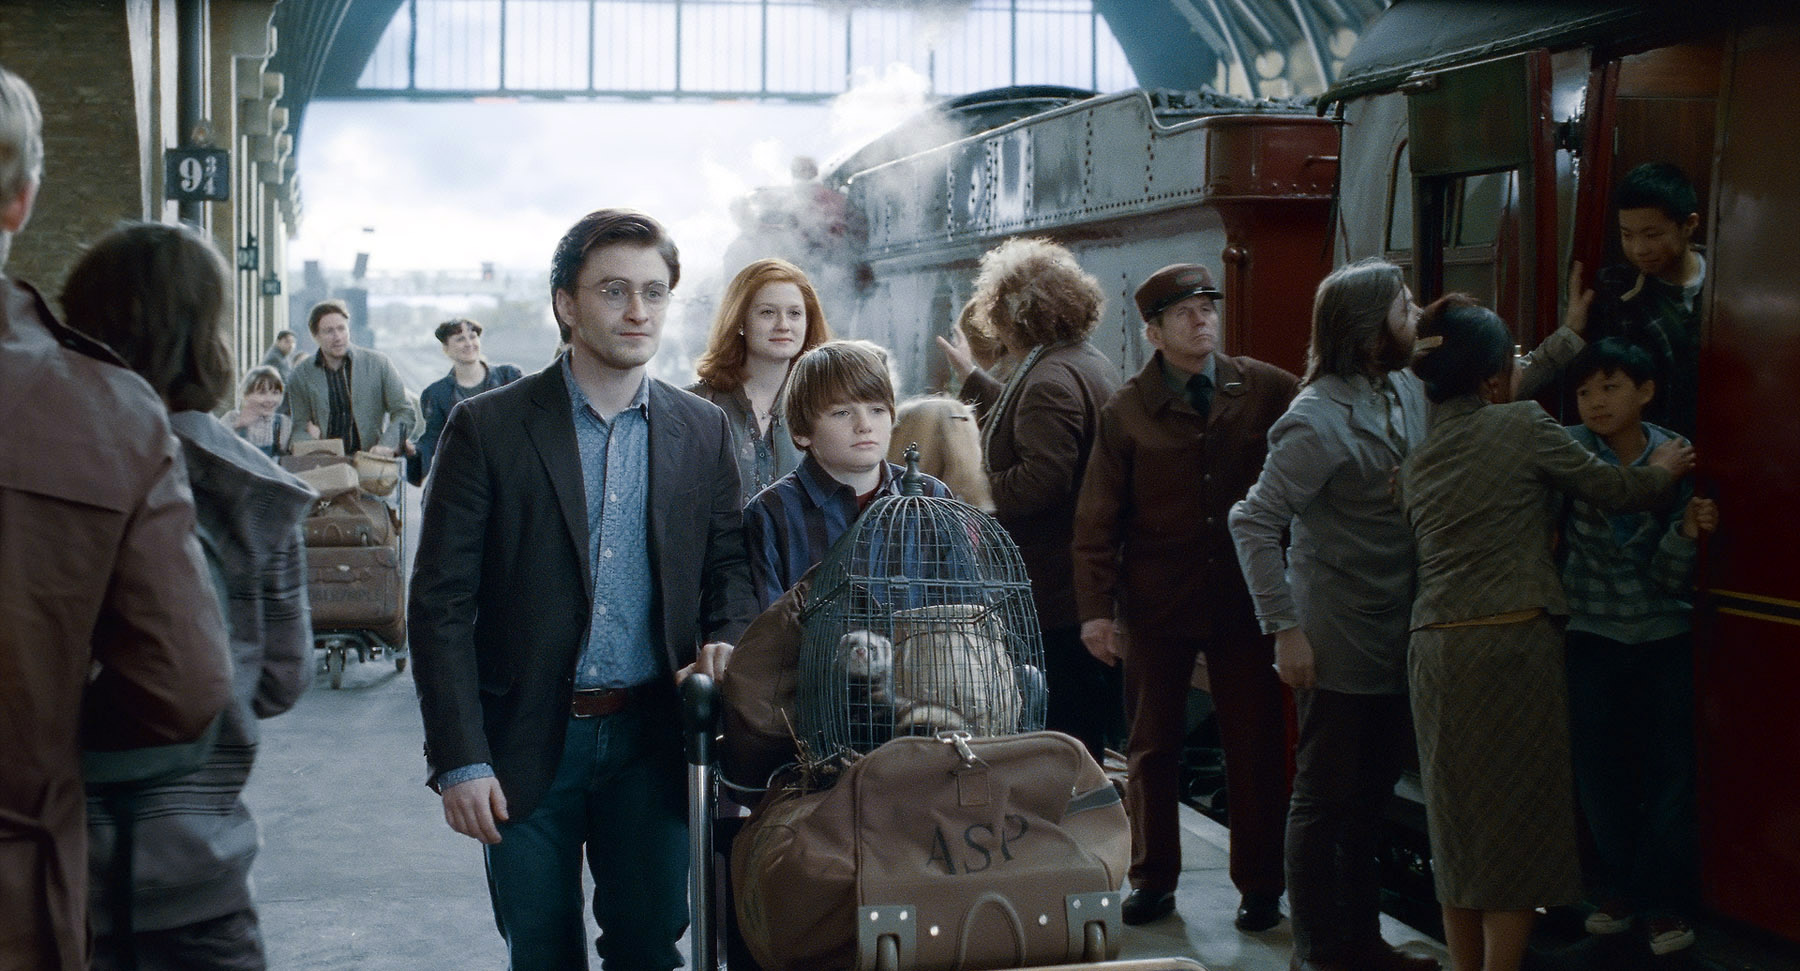 Daniel Radcliffe as Harry Potter and Arthur Bowen as Albus Severus Potter in <em>Harry Potter and the Deathly Hallows - Part 2</em> (Warner Bros.)